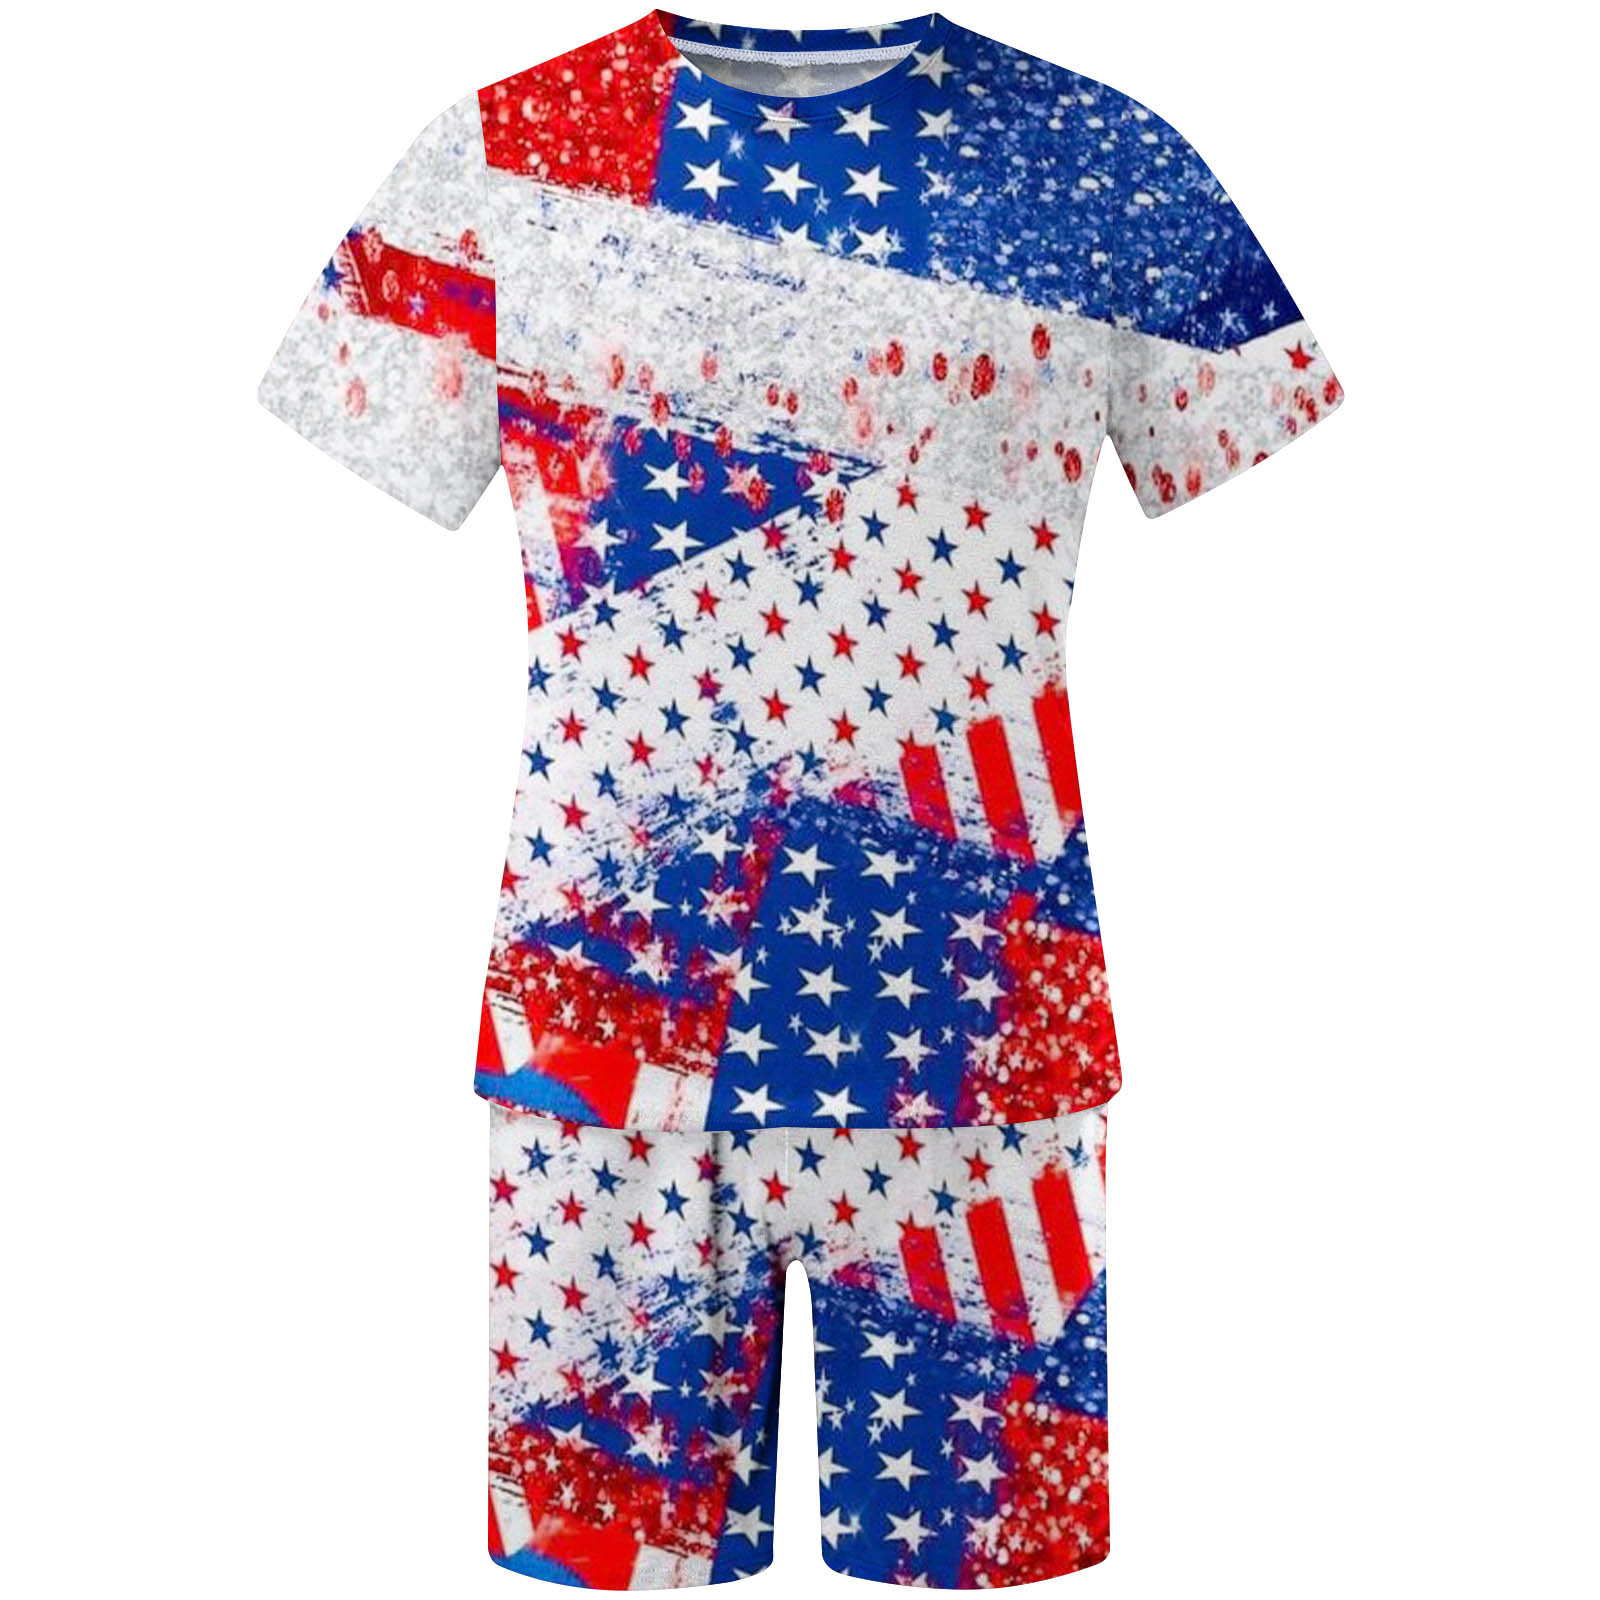 WQJNWEQ Christmas Formal Cloth Sale New Arrival 4th of July Men's 3D ...